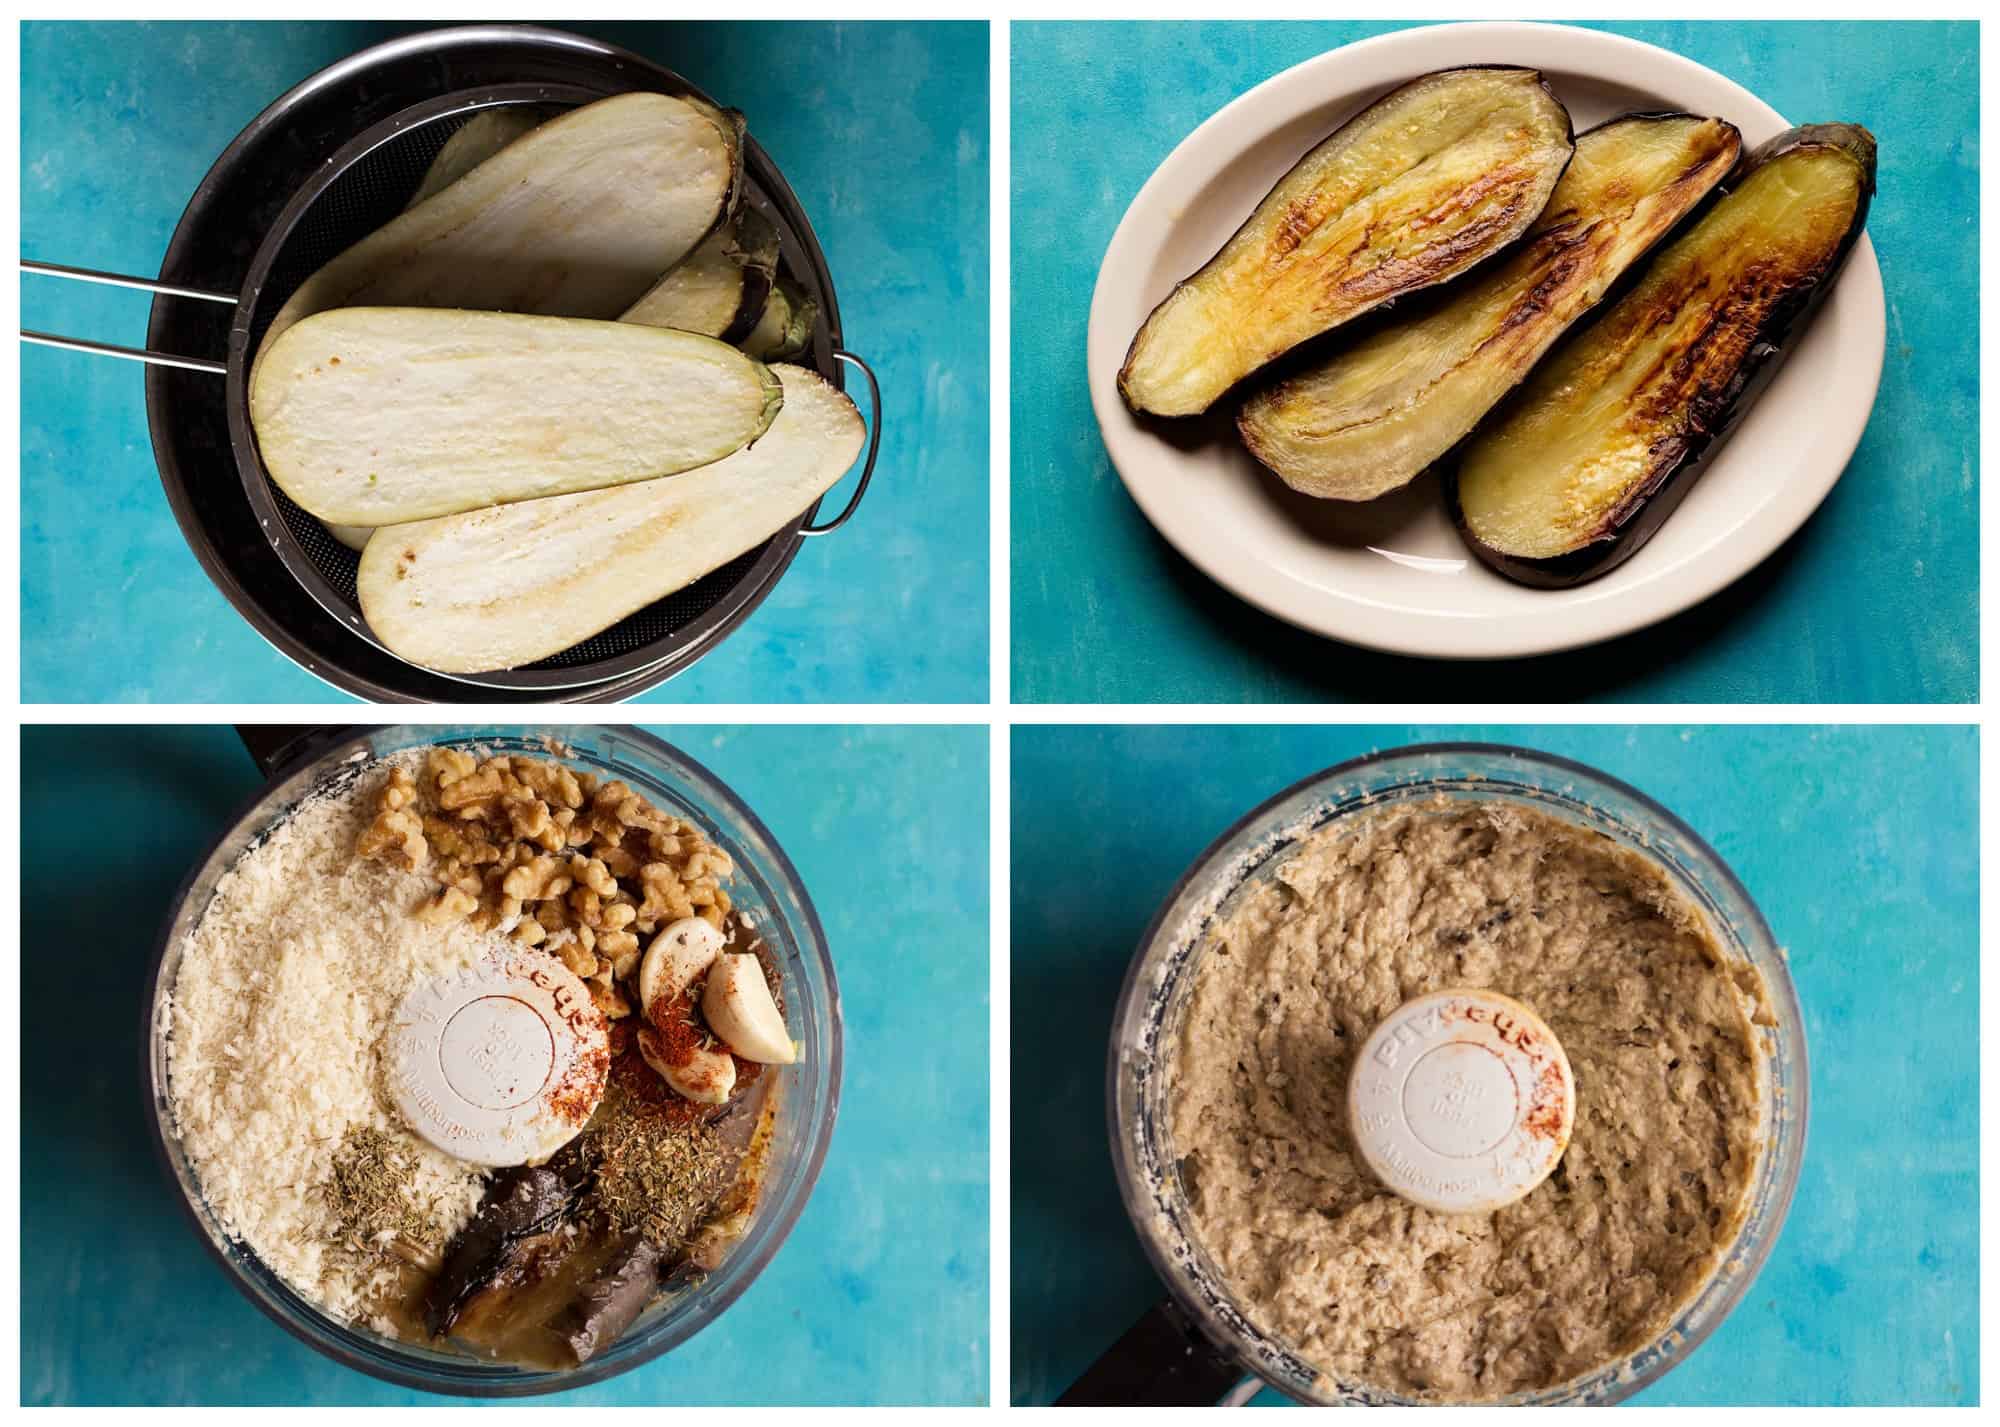 salt the eggplants, wash and dry them. Fry the eggplants and place them in a food processor with other ingredients and blend well. 